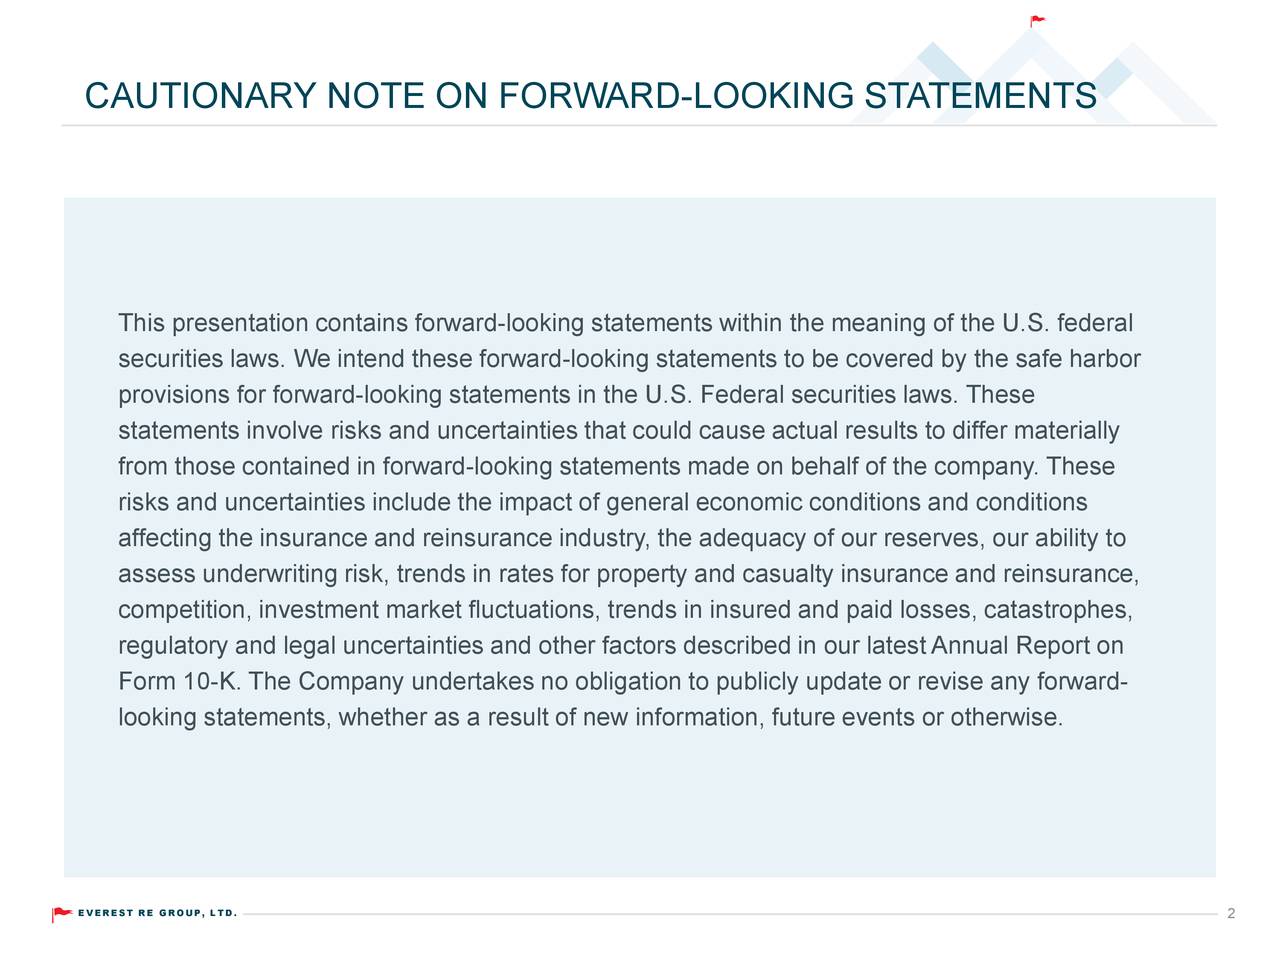 CAUTIONARY NOTE ON FORWARD-LOOKING STATEMENTS